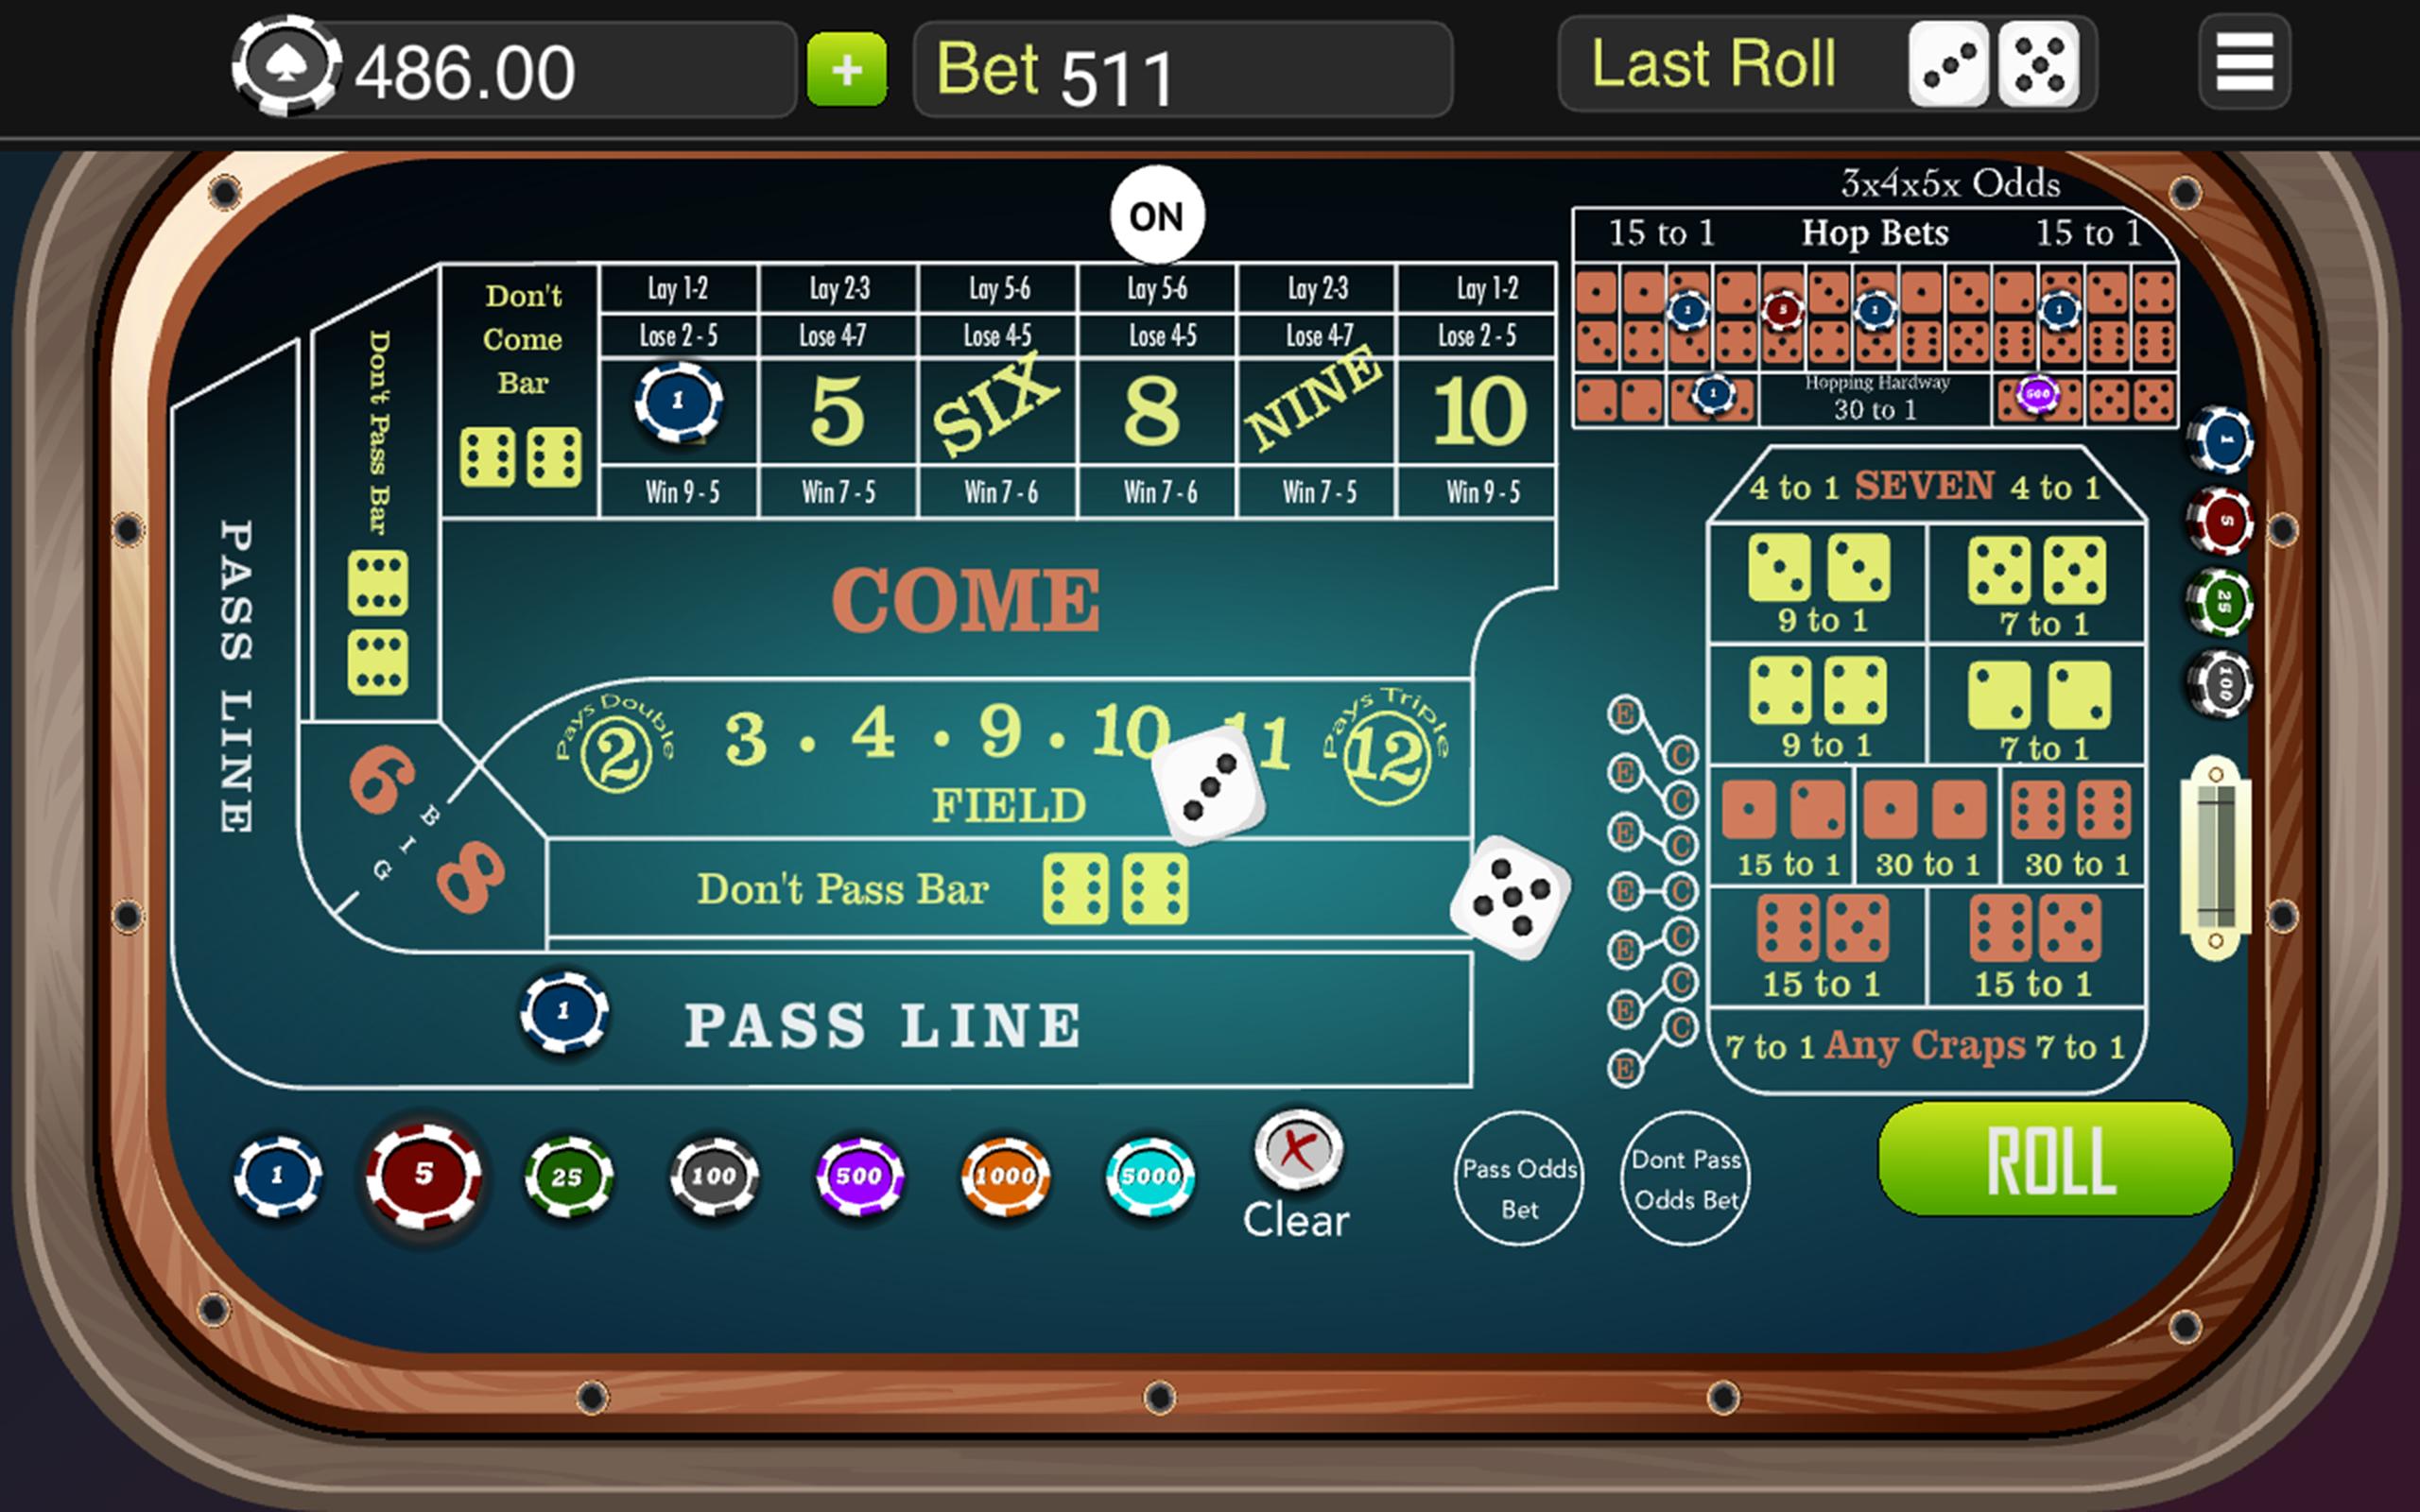 Hop bets on craps table rules